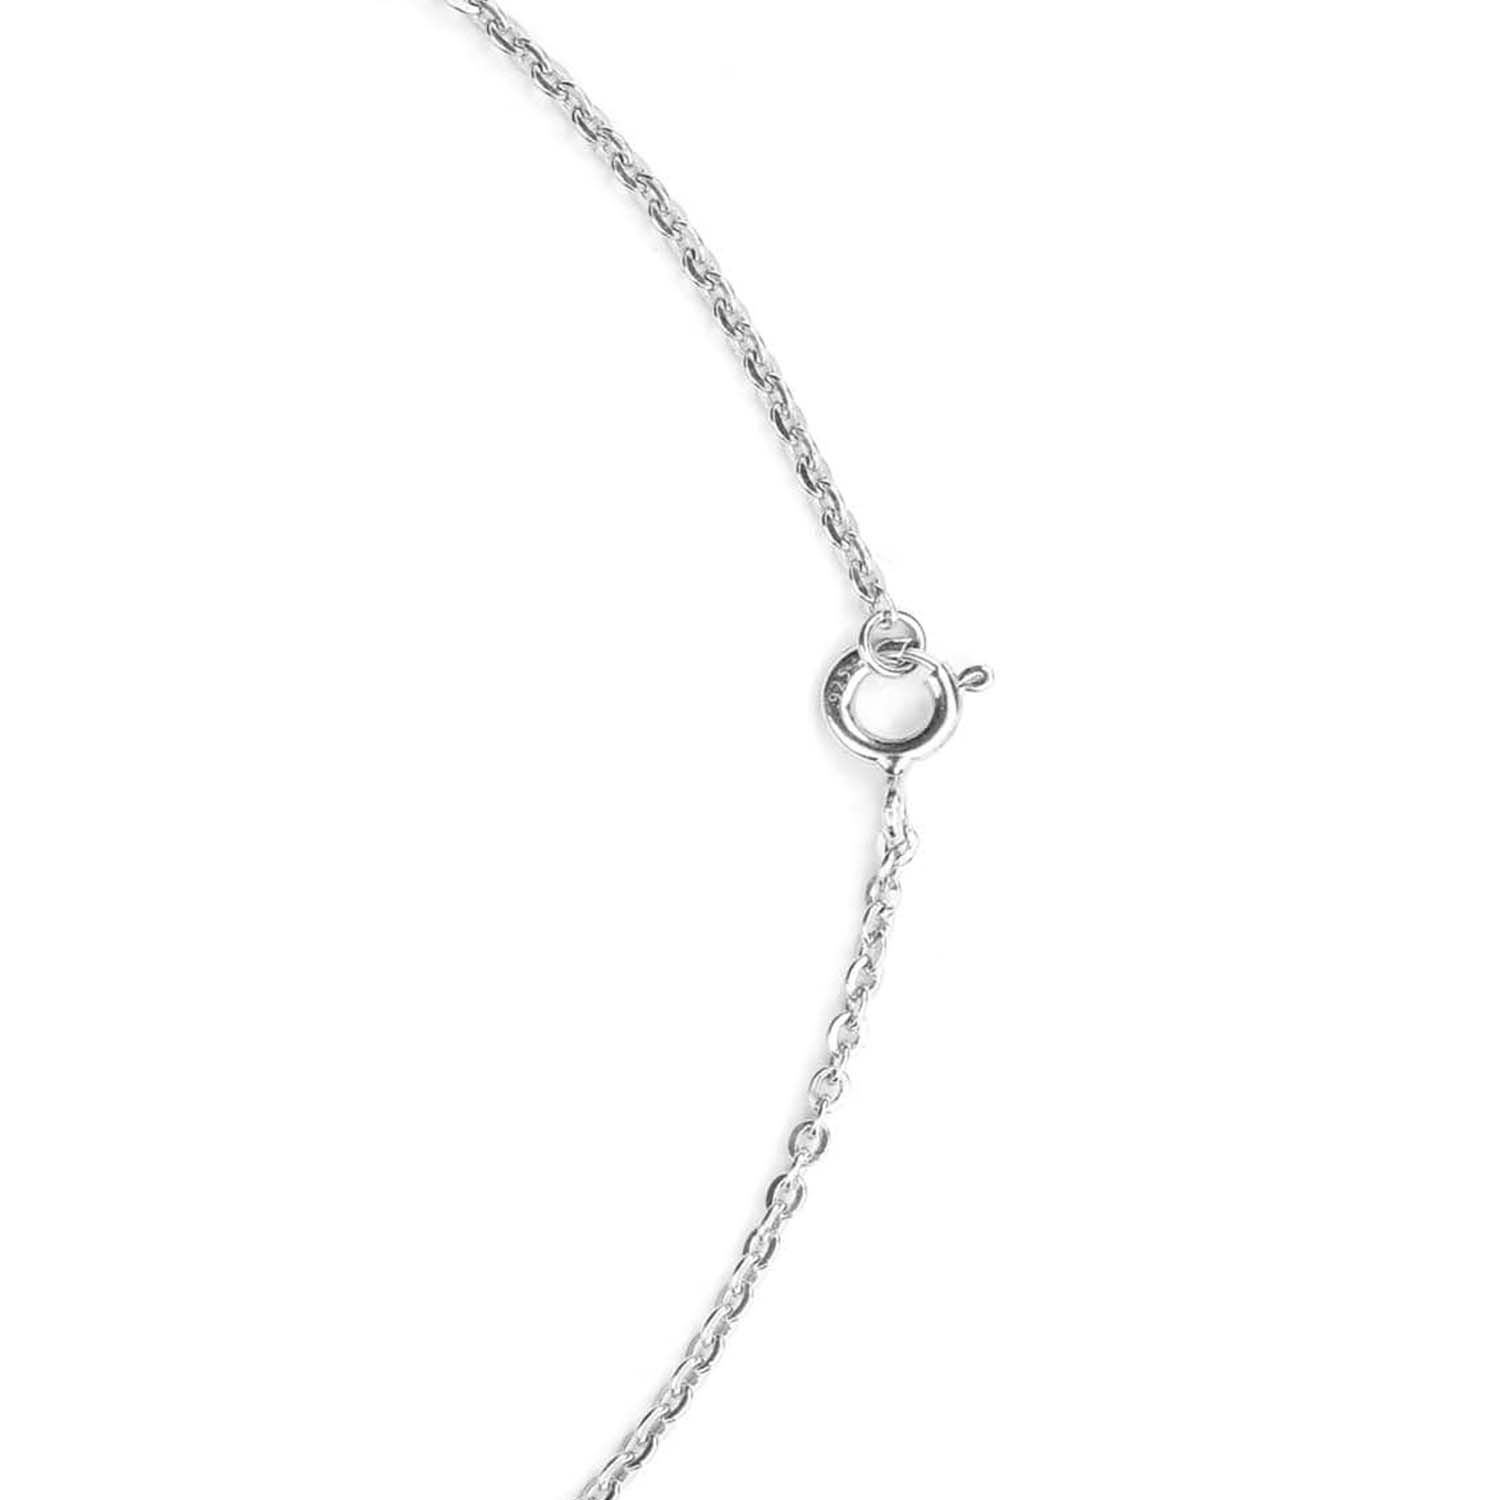 Nested Heart 925 Silver Necklace Chain